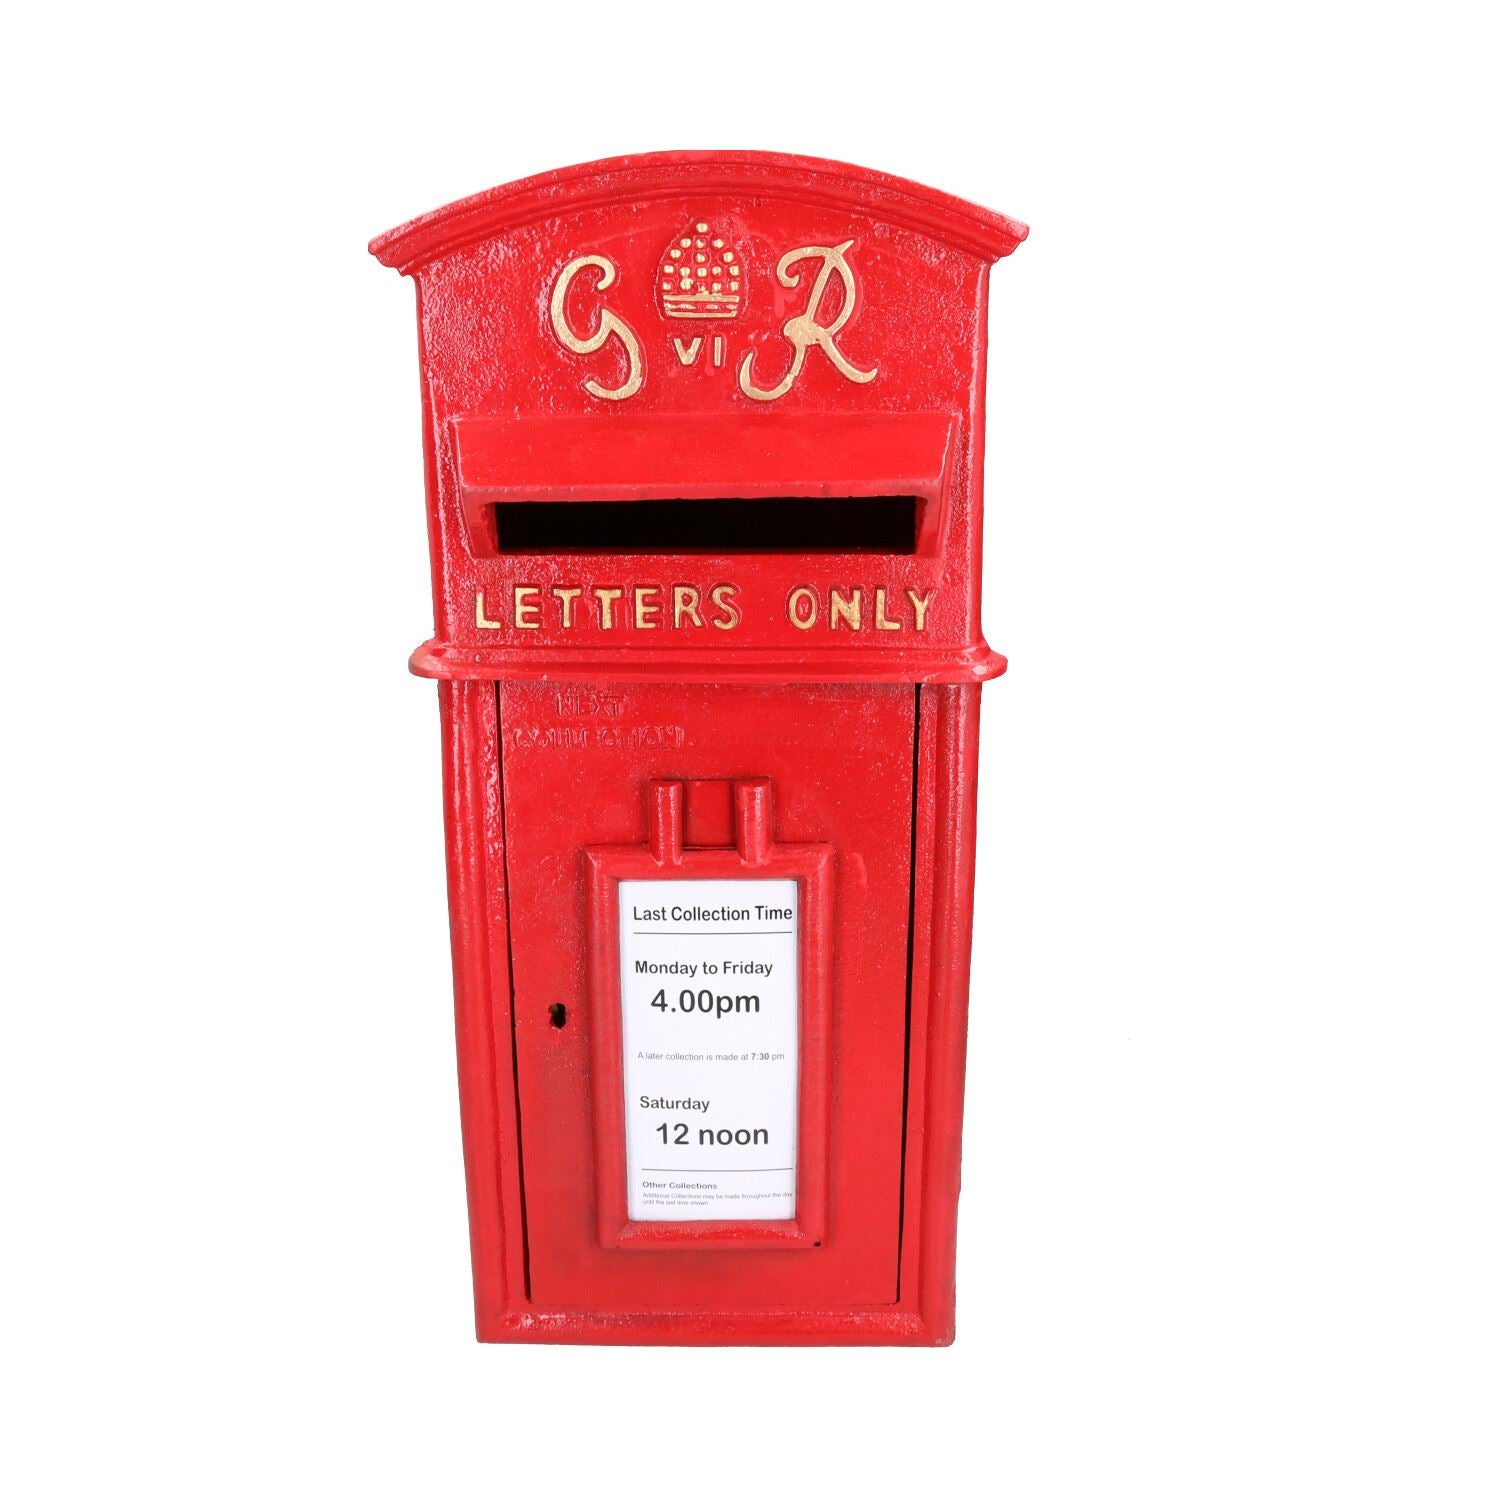 GR Royal Mail Post Mail Letter Box Replica Cast Iron Red Post Office Lockable GB